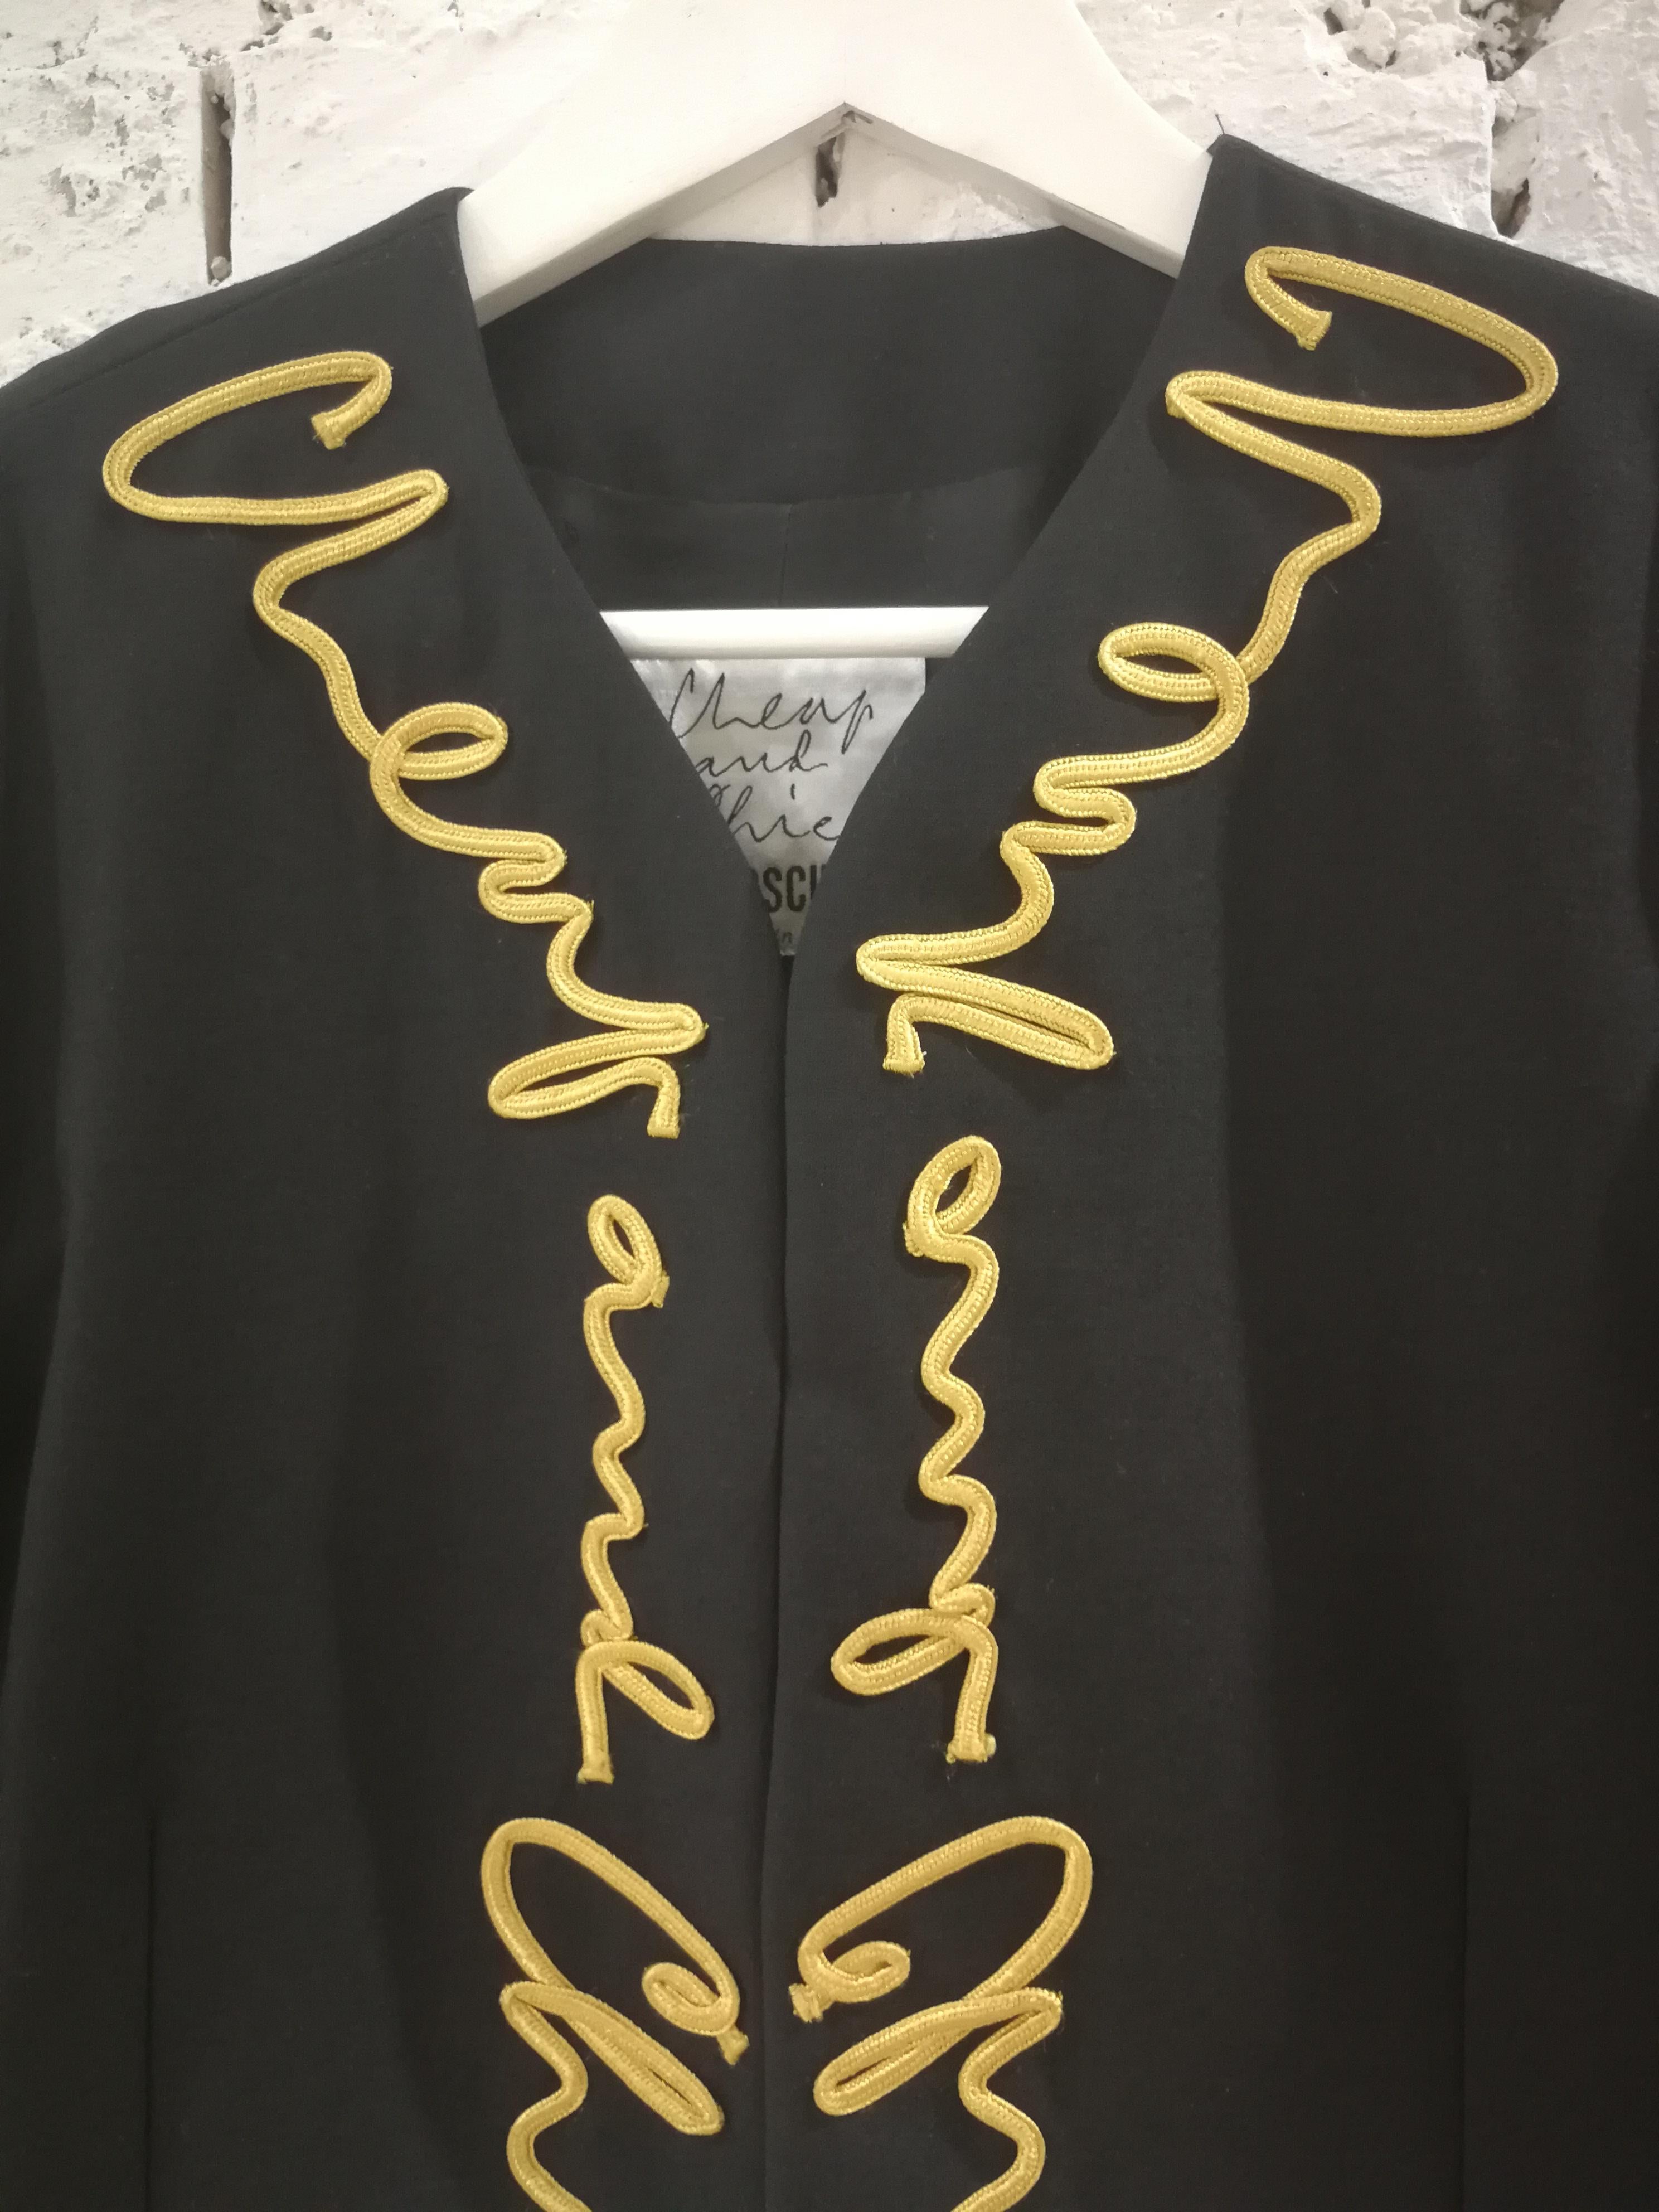 Moschino Cheap & Chic Black Gold Jacket
Unique and really hard to find Moschino Black and gold written jacket
totally made in italy in size 44
Composition: Wool
Measurements: 
total lenght 45 cm
shoulder to hem 62 cm 
